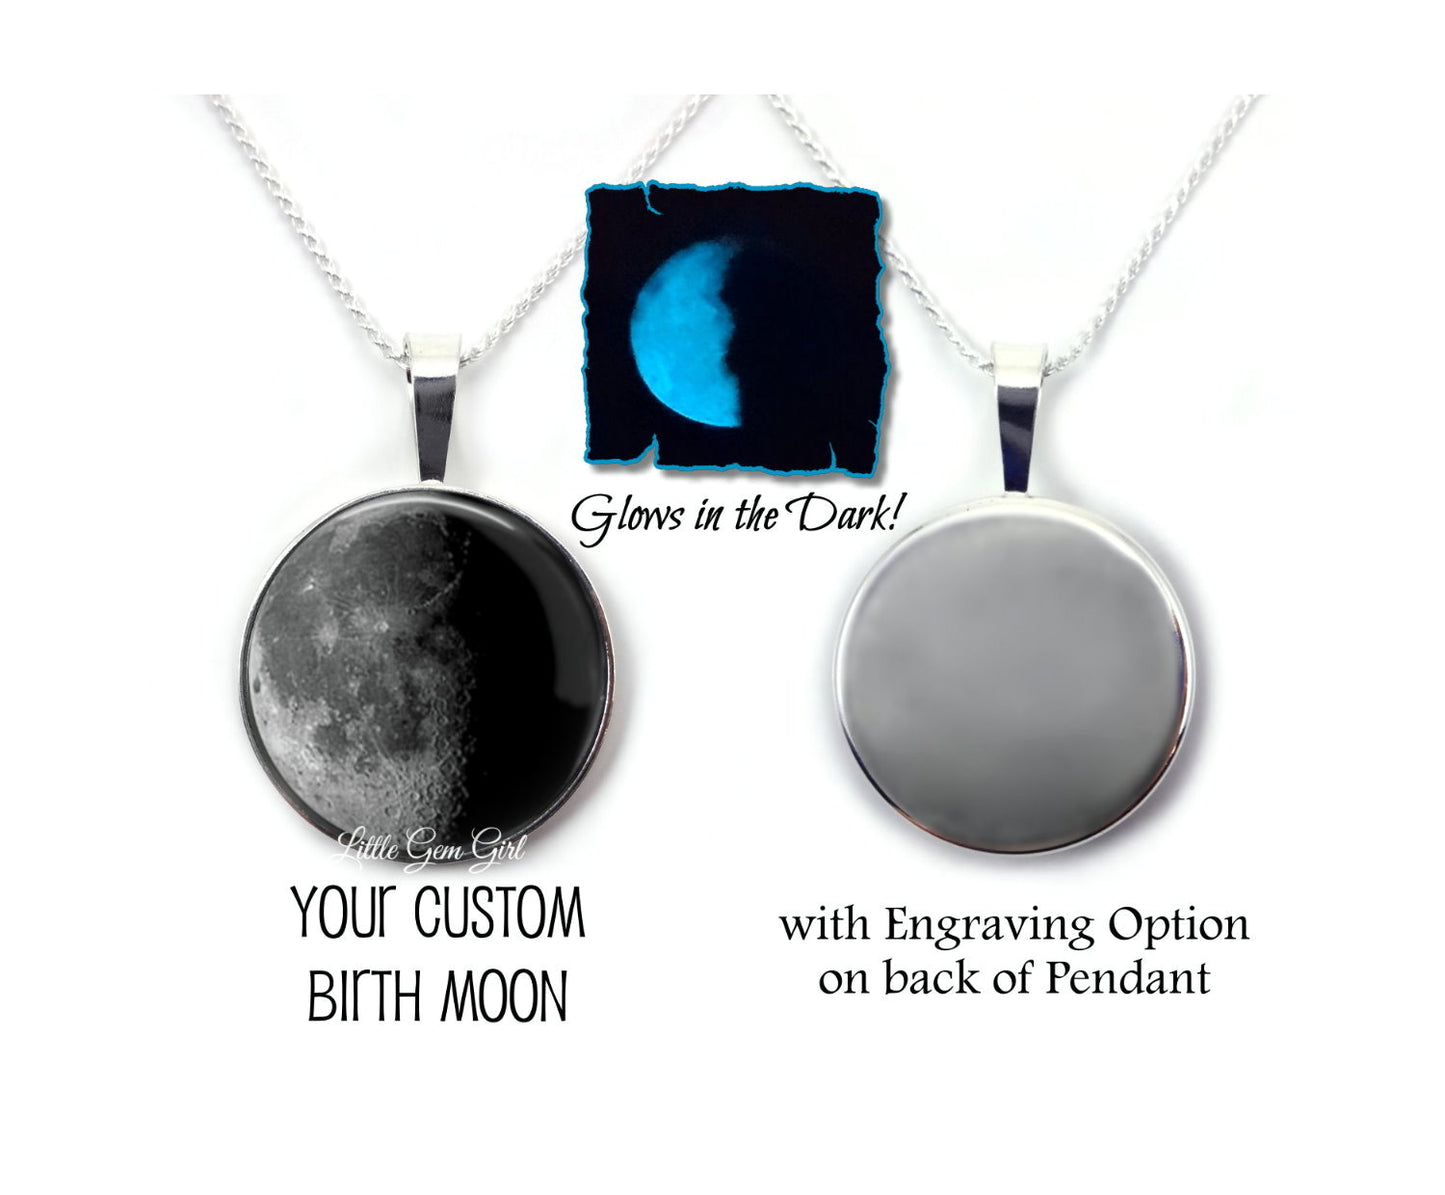 Sterling Silver Custom Birth Moon Necklace - Glow in the Dark Moon Phase Pendant optional Engraving - Glowing Birthday Moon Jewelry